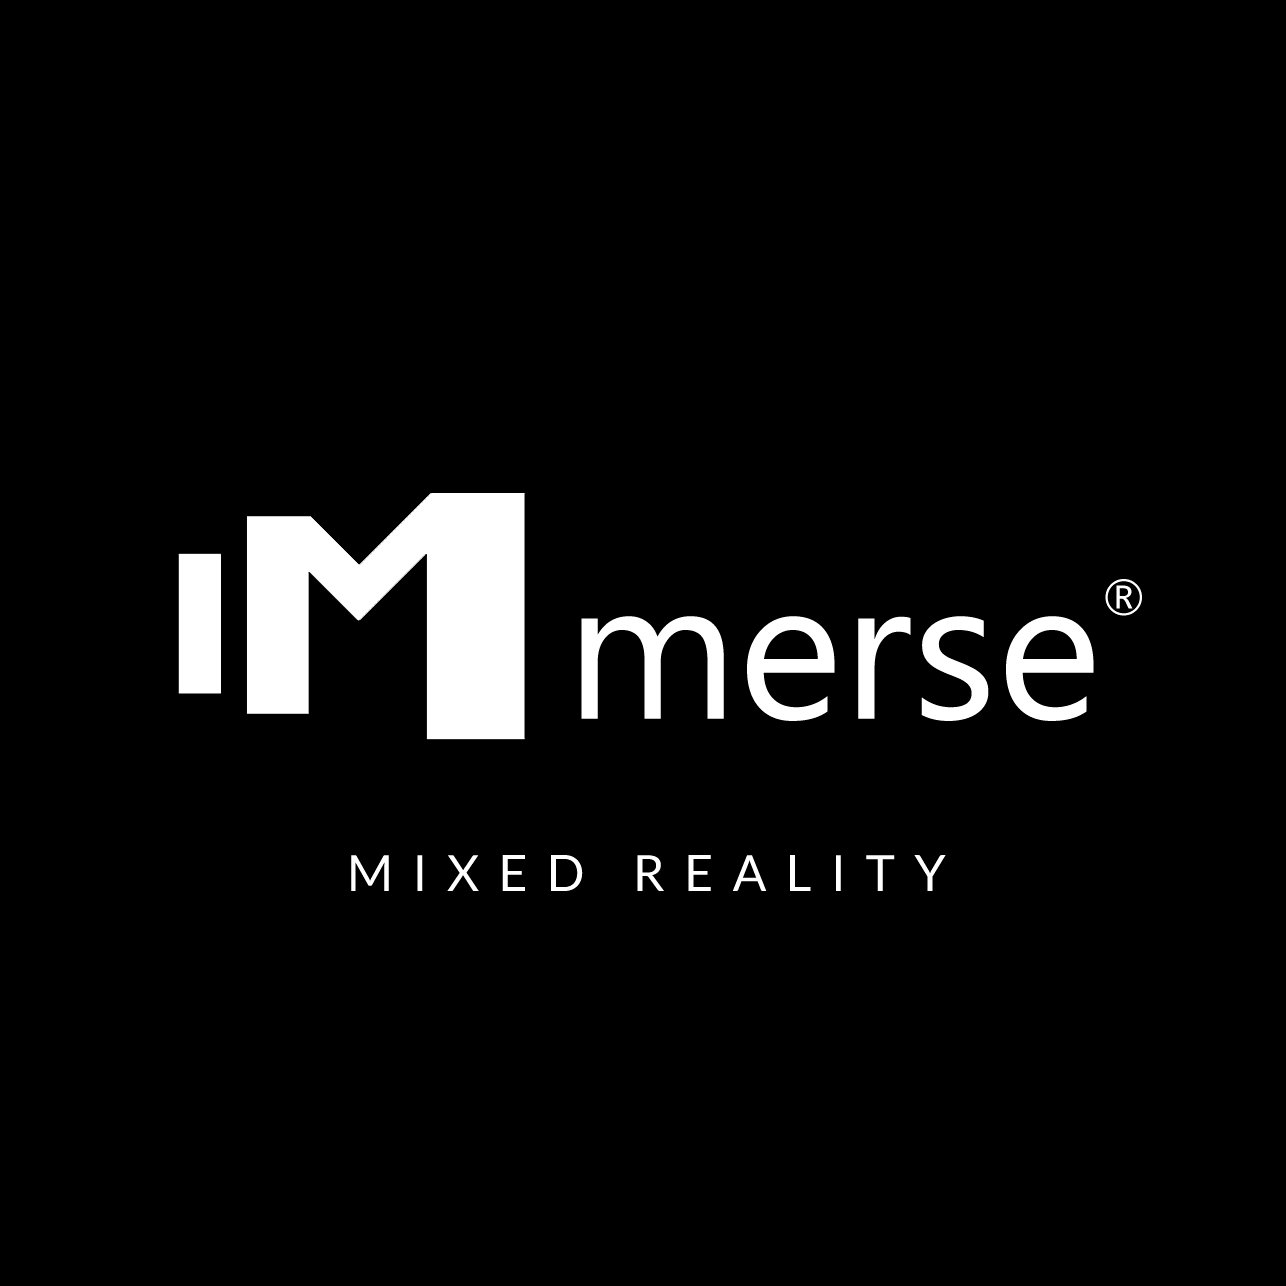 We are a new Mixed Reality games and apps developing team.